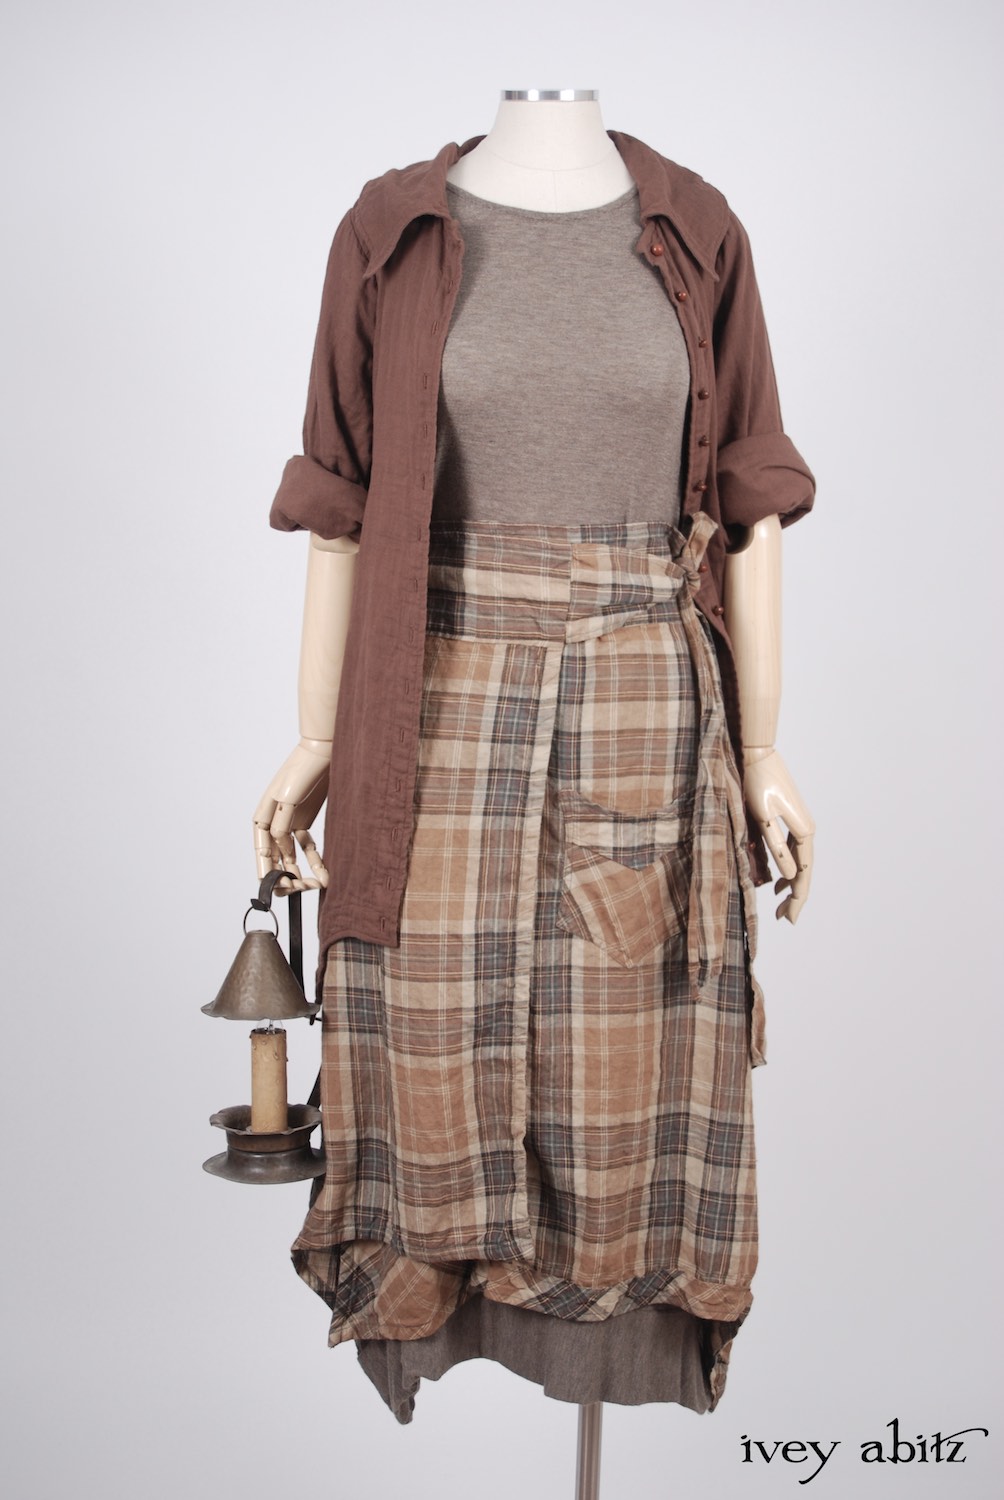 Ivey Abitz - Chittister Shirt Jacket in Blushed Double Layered Voile  - Coulson Frock in Flaxseed Featherlight Knit, High Water Length - Highlands Skirt in Eternal Spring Plaid Linen